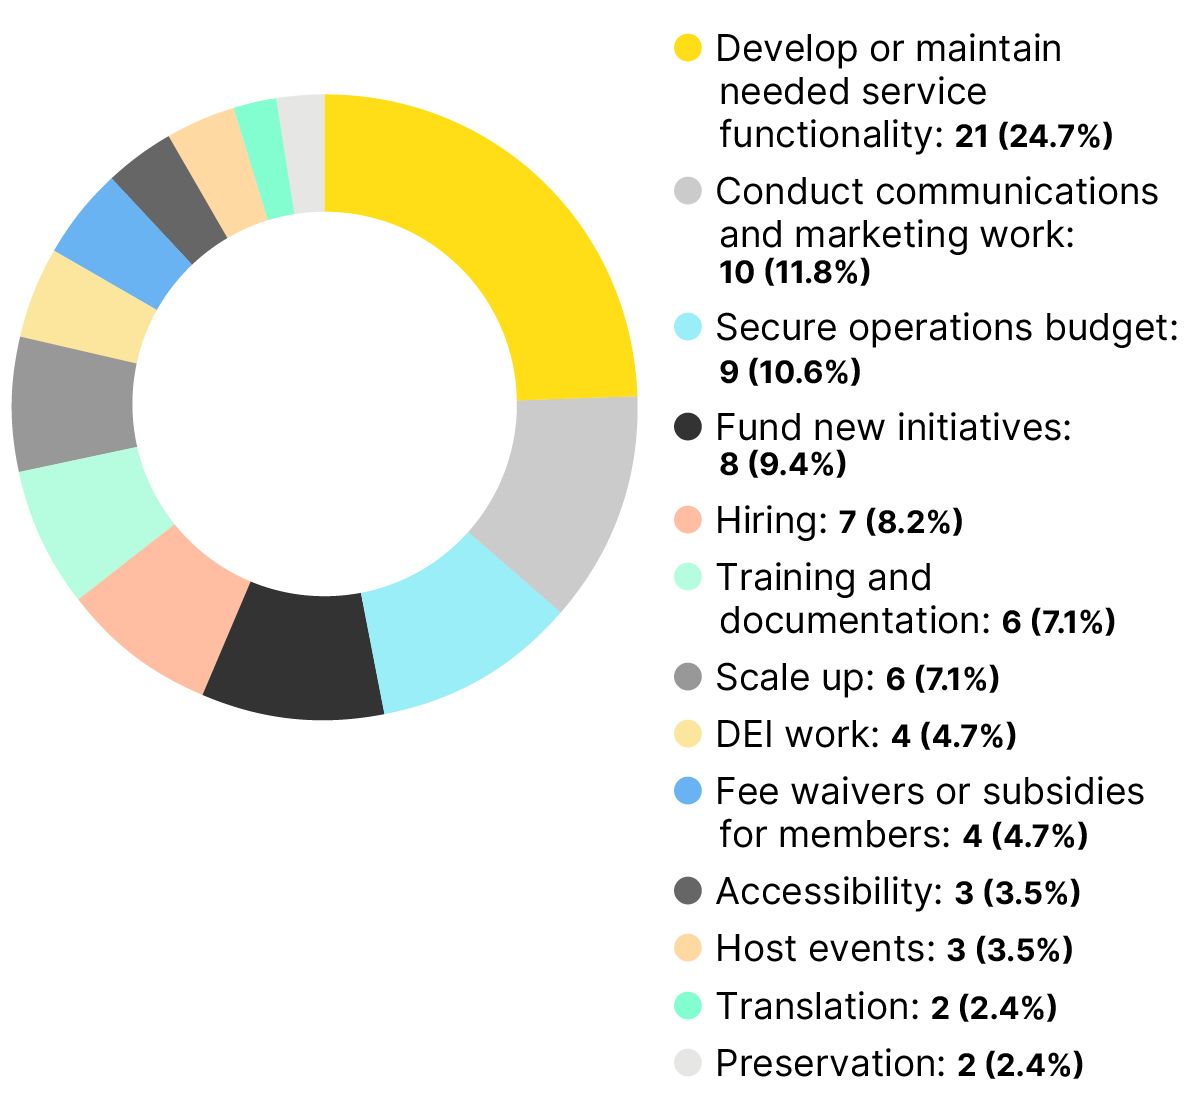 Doughnut chart of the number and percentage of funding needs by categories. 24.7% of funding needs are around developing and maintaining needed service functionality.